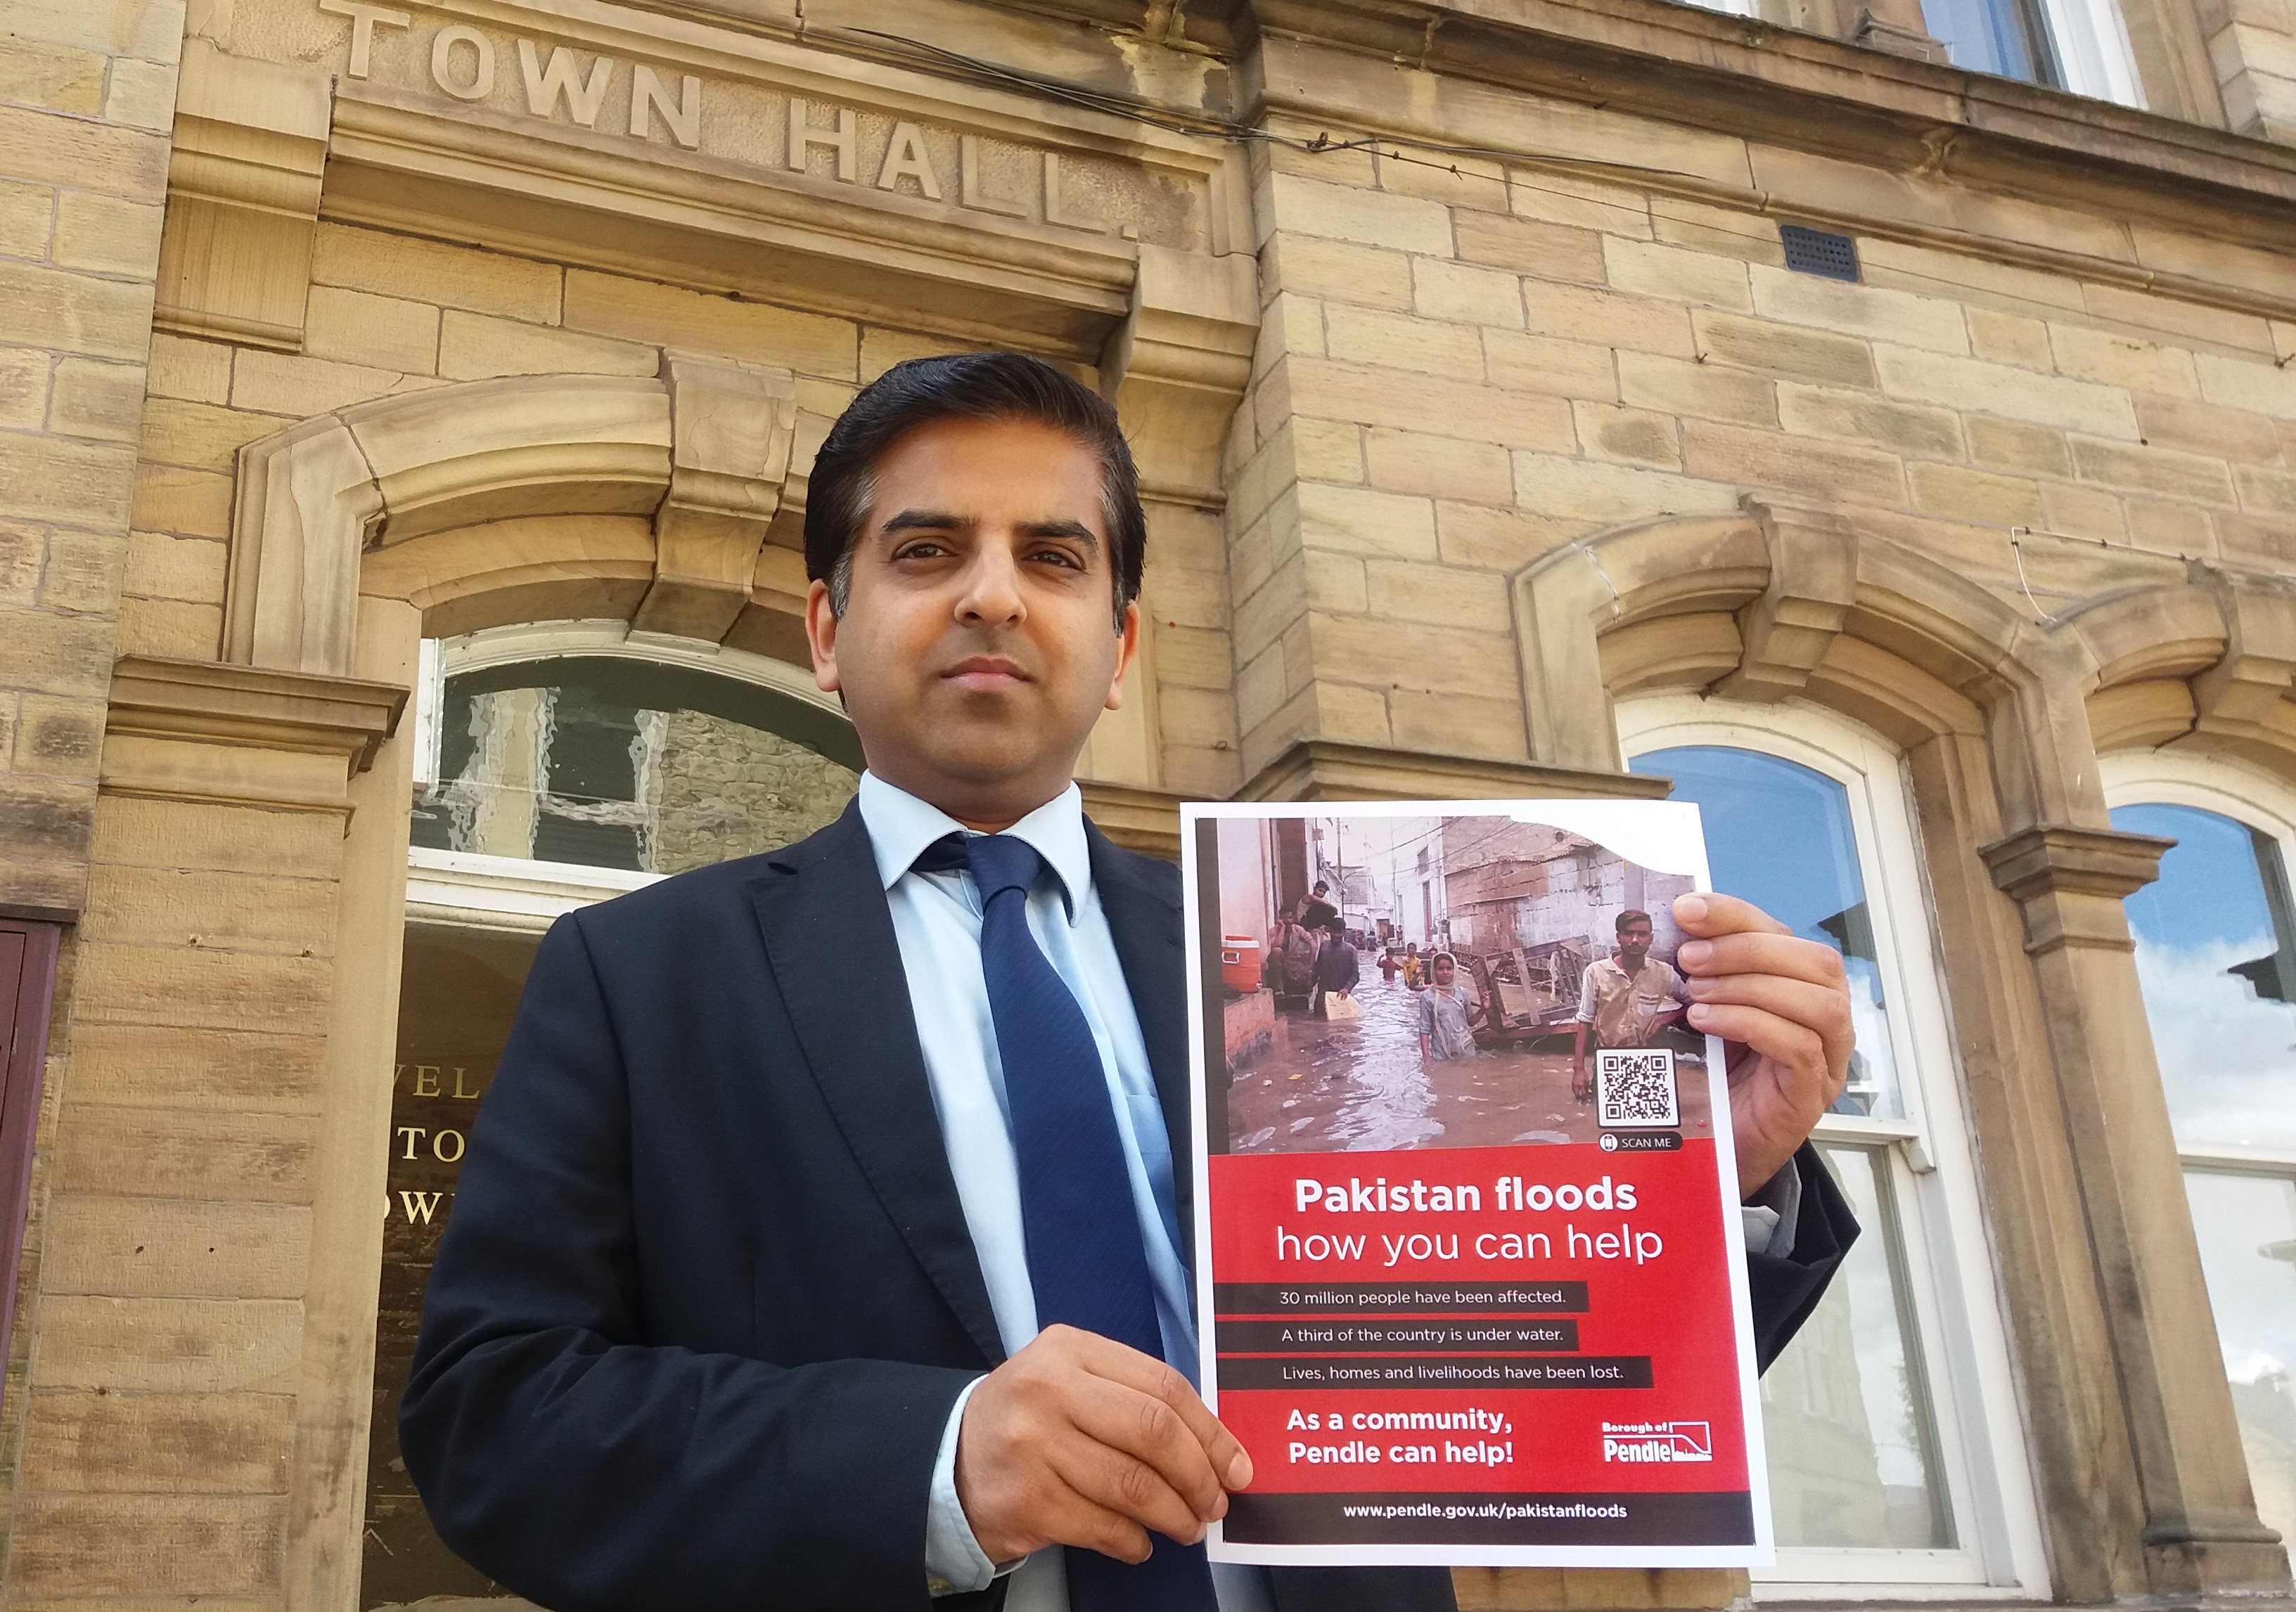 Pakistan floods – how Pendle people can help 